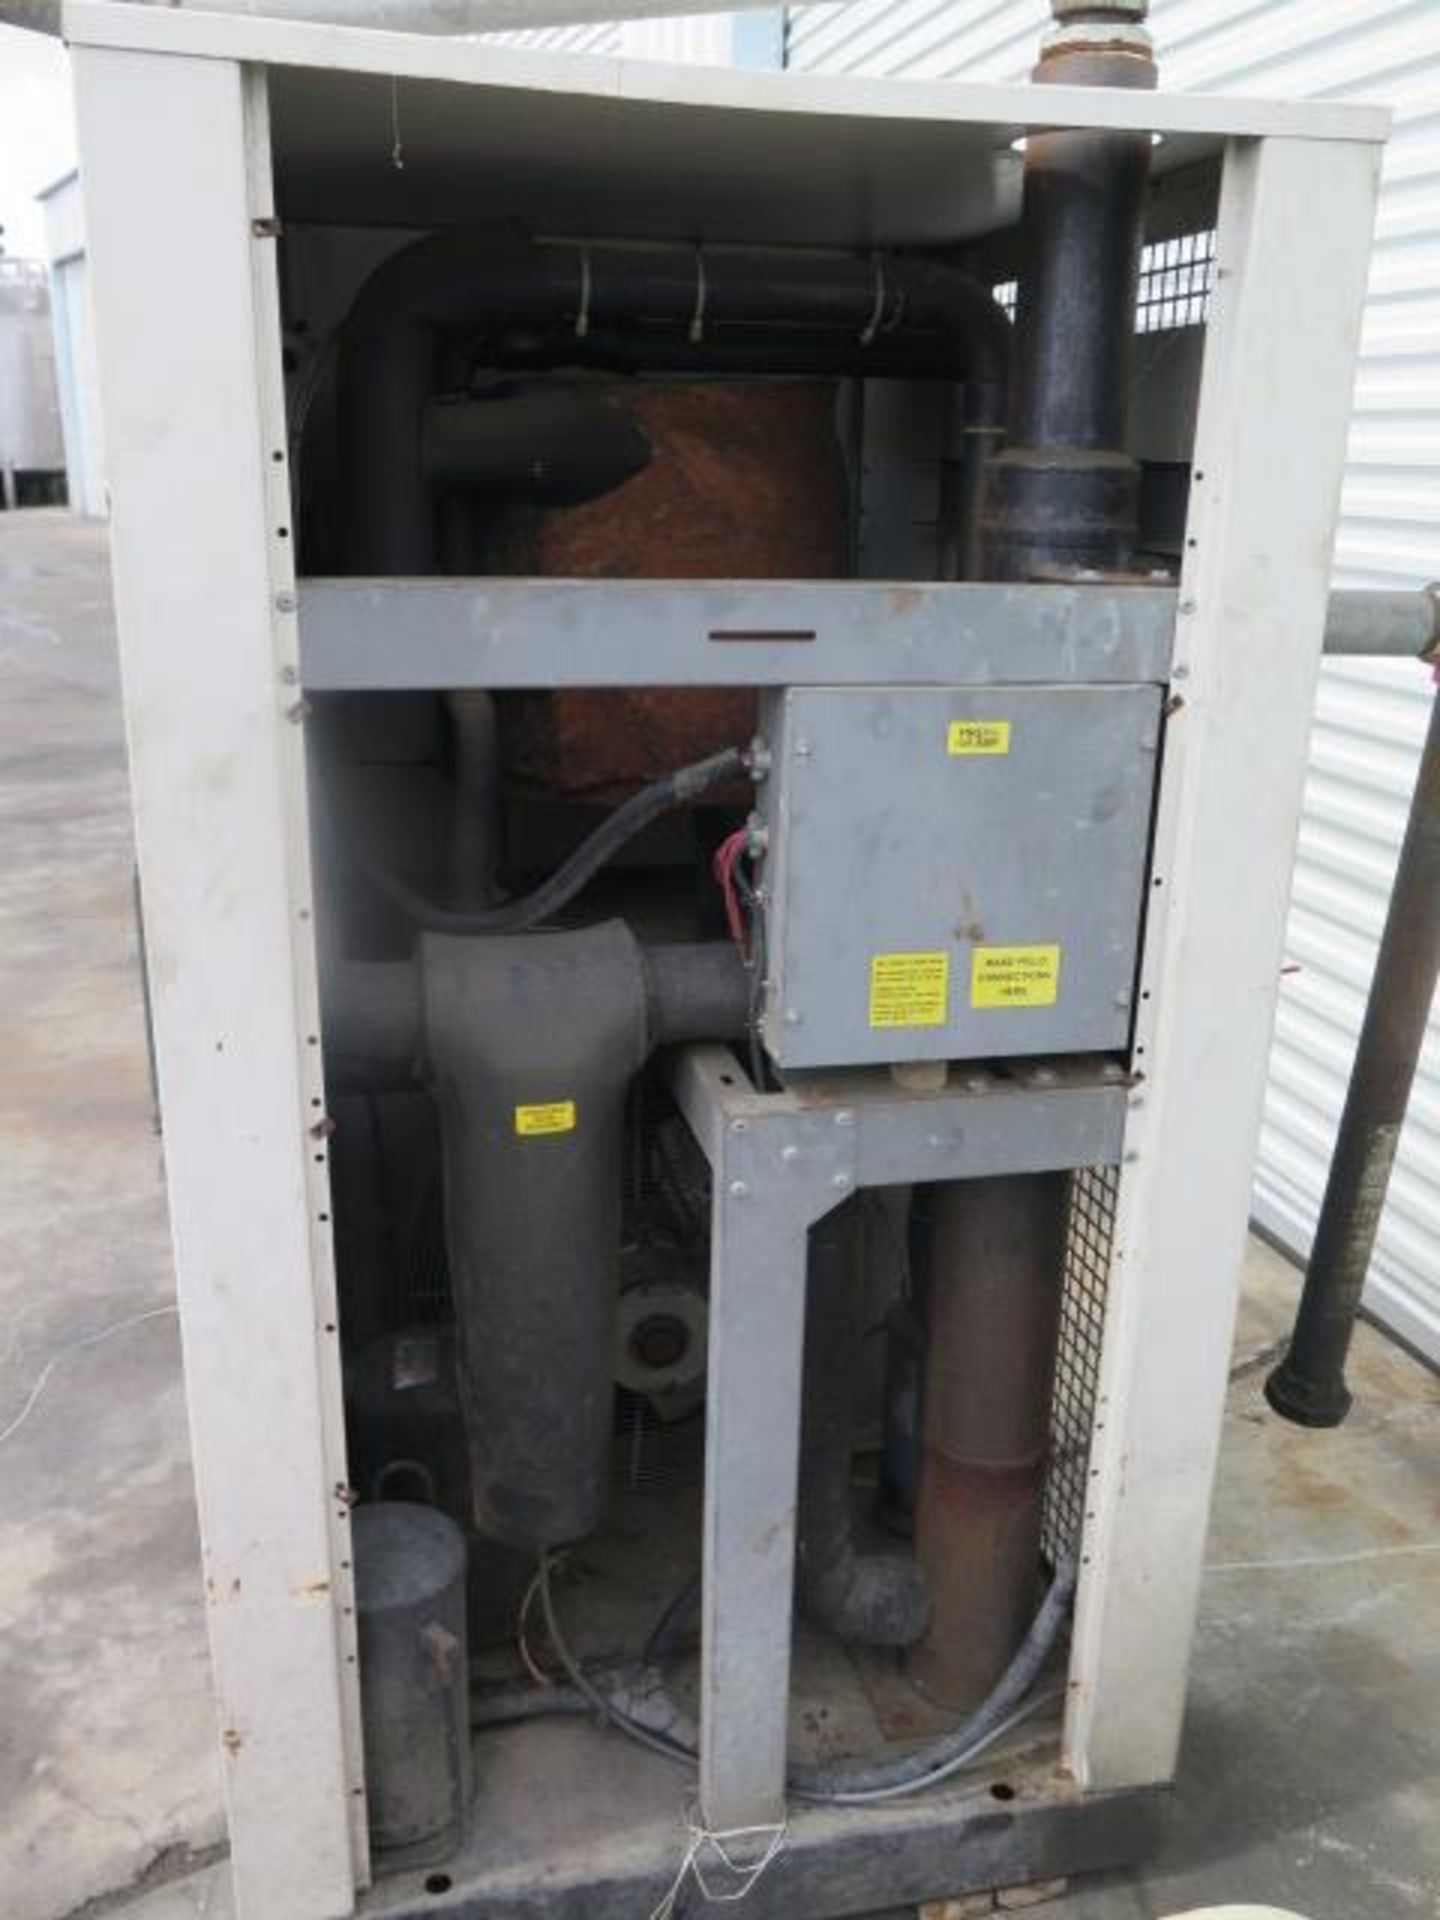 Ingersoll Tand DXR425 Refrigerated Air Dryer s/n 98ADXR0108 (SOLD AS-IS - NO WARRANTY) - Image 3 of 6